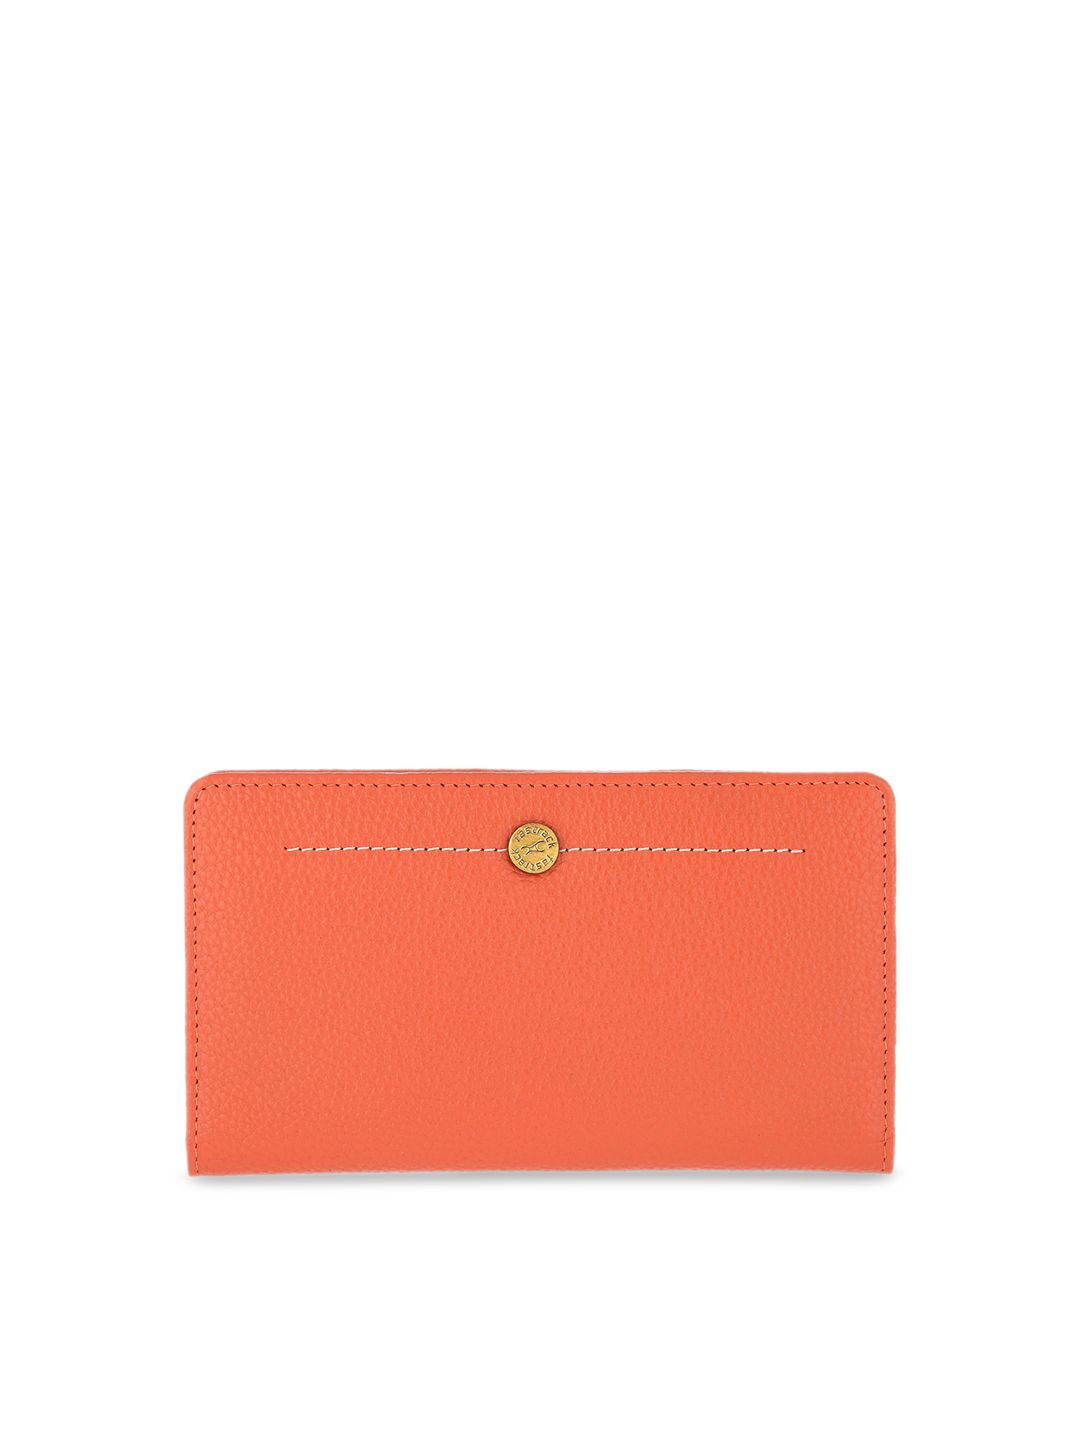 Fastrack Women Peach-Coloured Solid Leather Two Fold Wallet Price in India